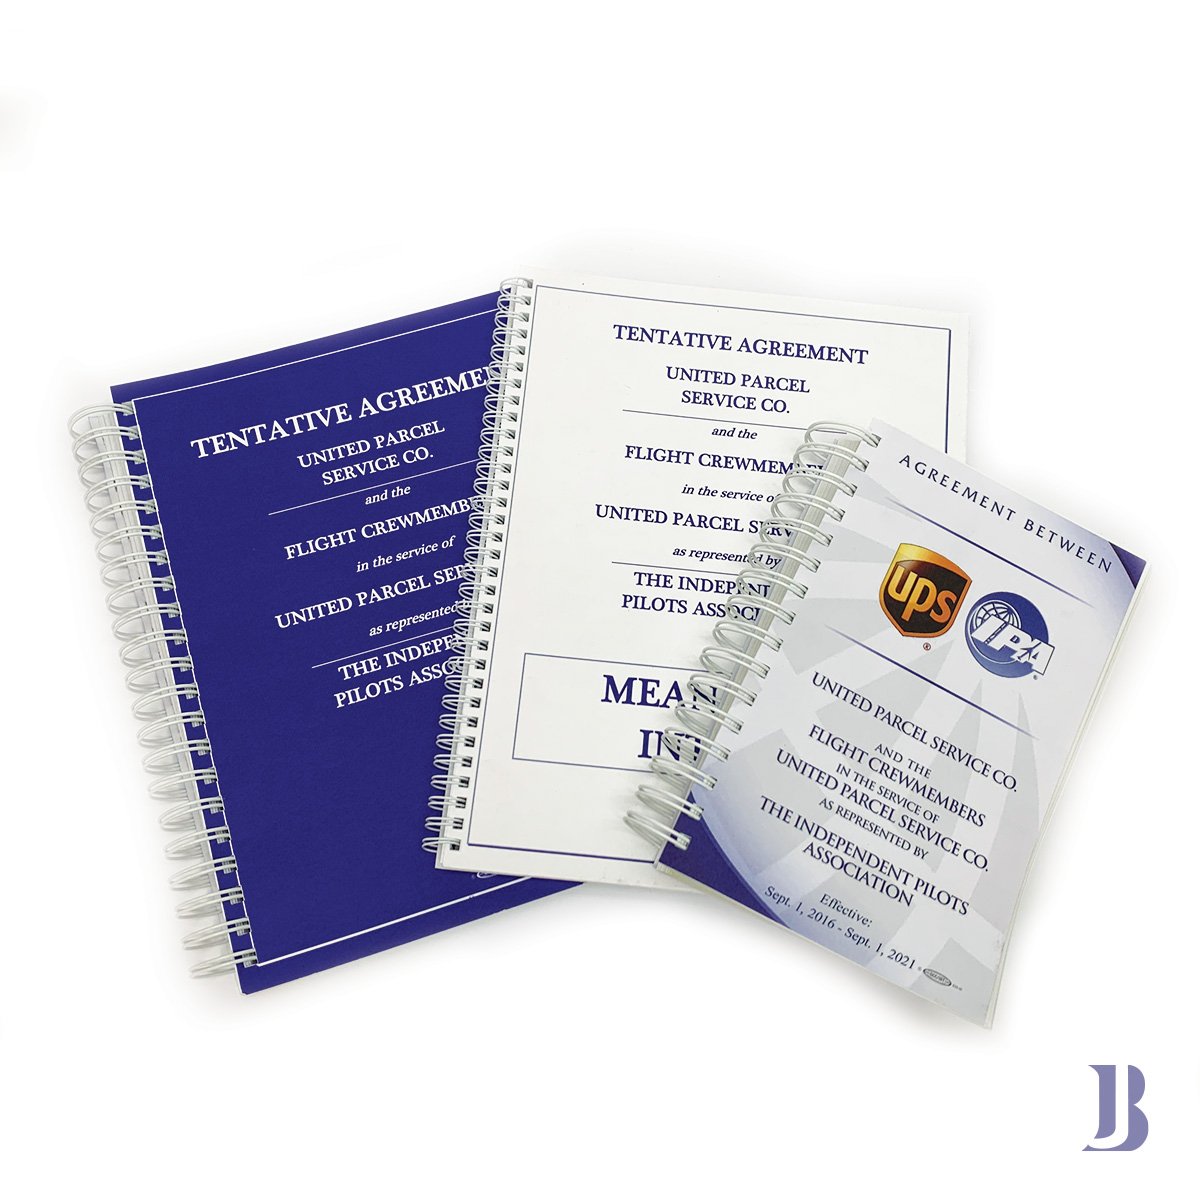 Custom spiral bound books are perfect for books of any size. From union agreements to company handbooks, cookbooks to manuals. Have questions? Give us a call!
.
#spiralbound #wirebound #sprio #printing #binding #bookbinding #agreements #cookbooks #albums #unions #legalagreements